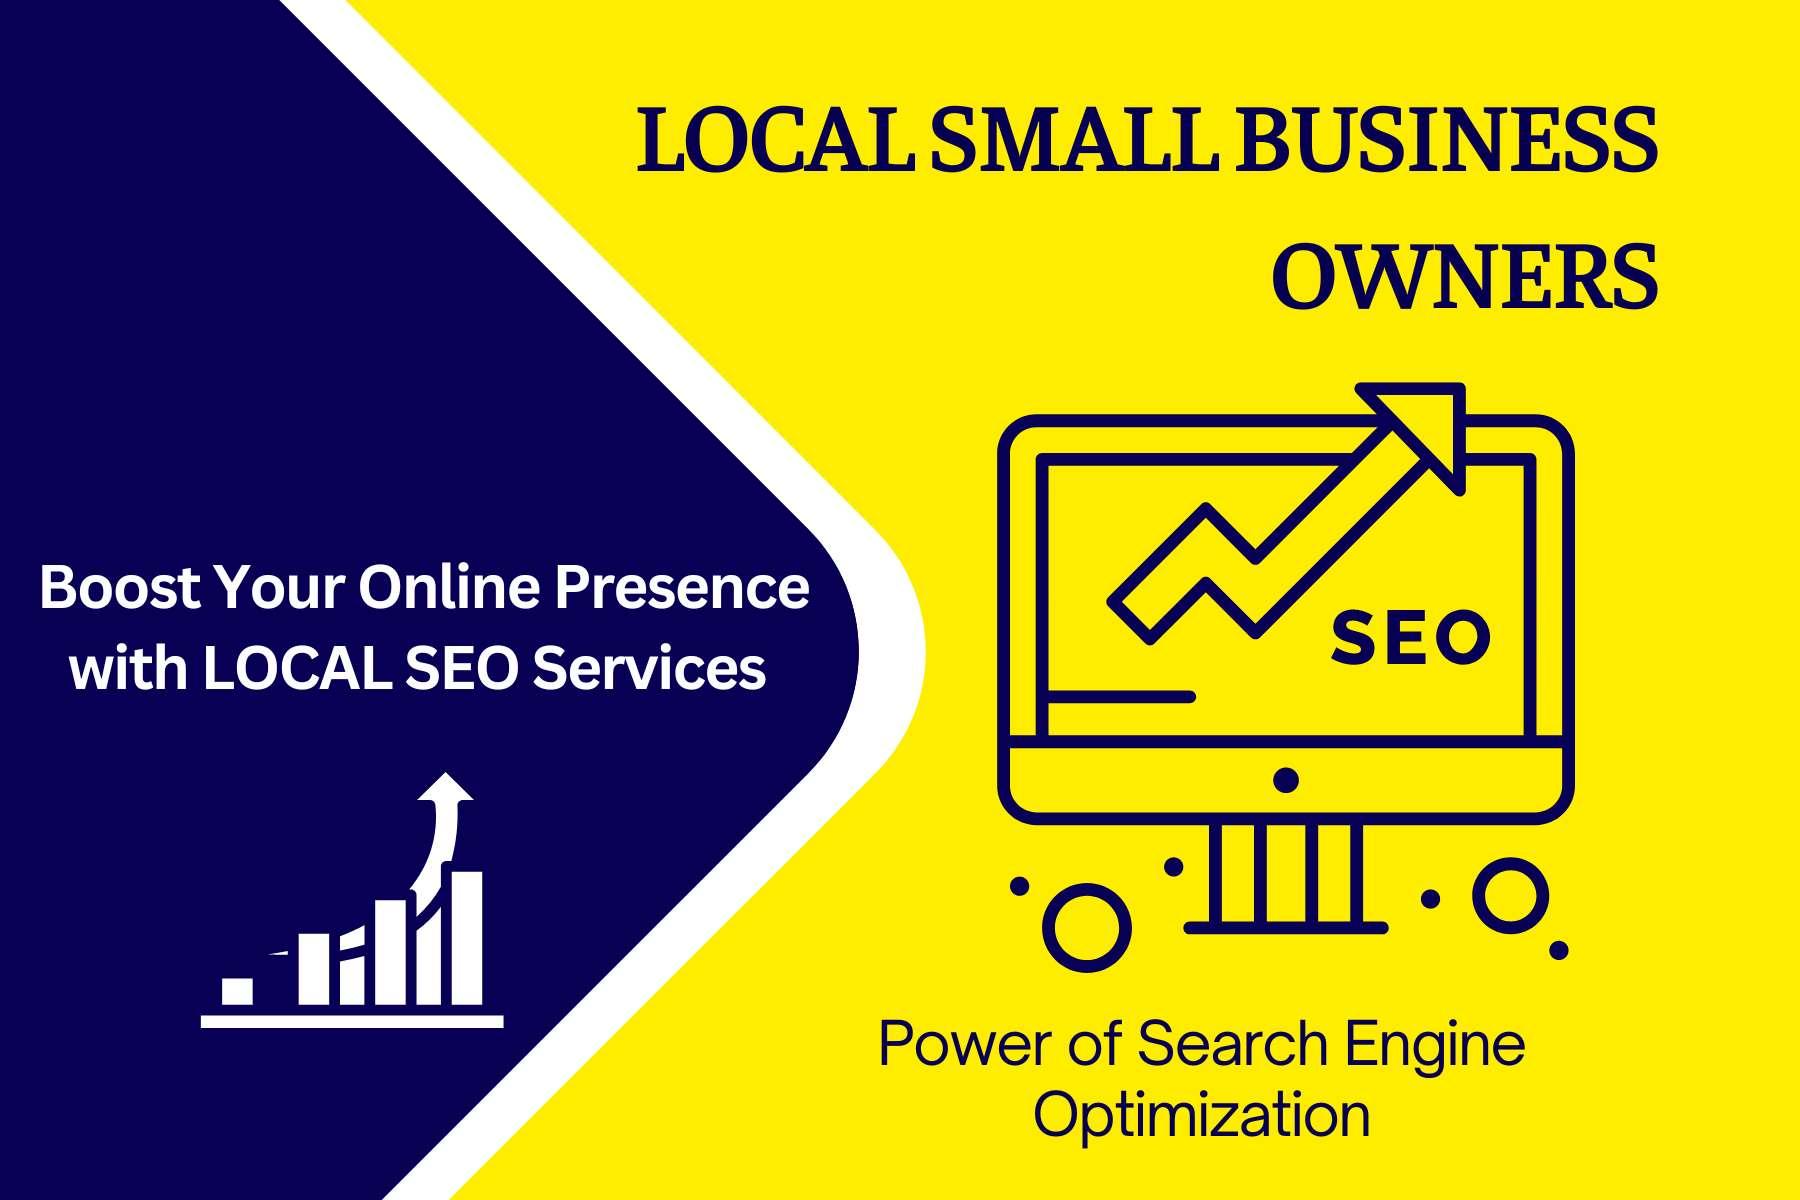 SEO Services for Small Business: Boost Your Online Presence